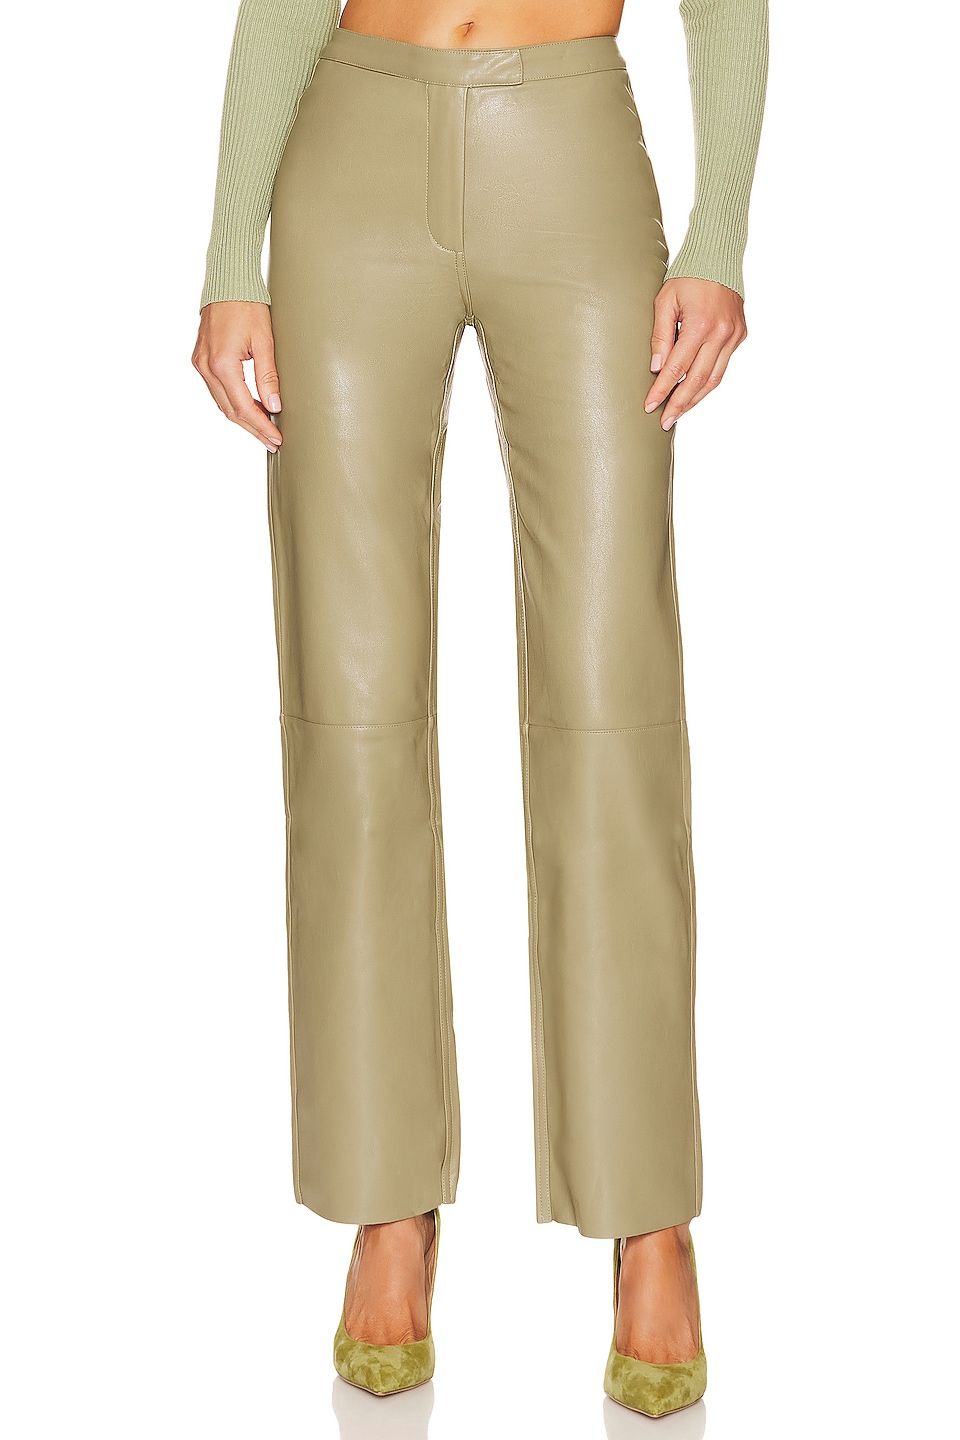 Sovere Influence Leatherette Pant